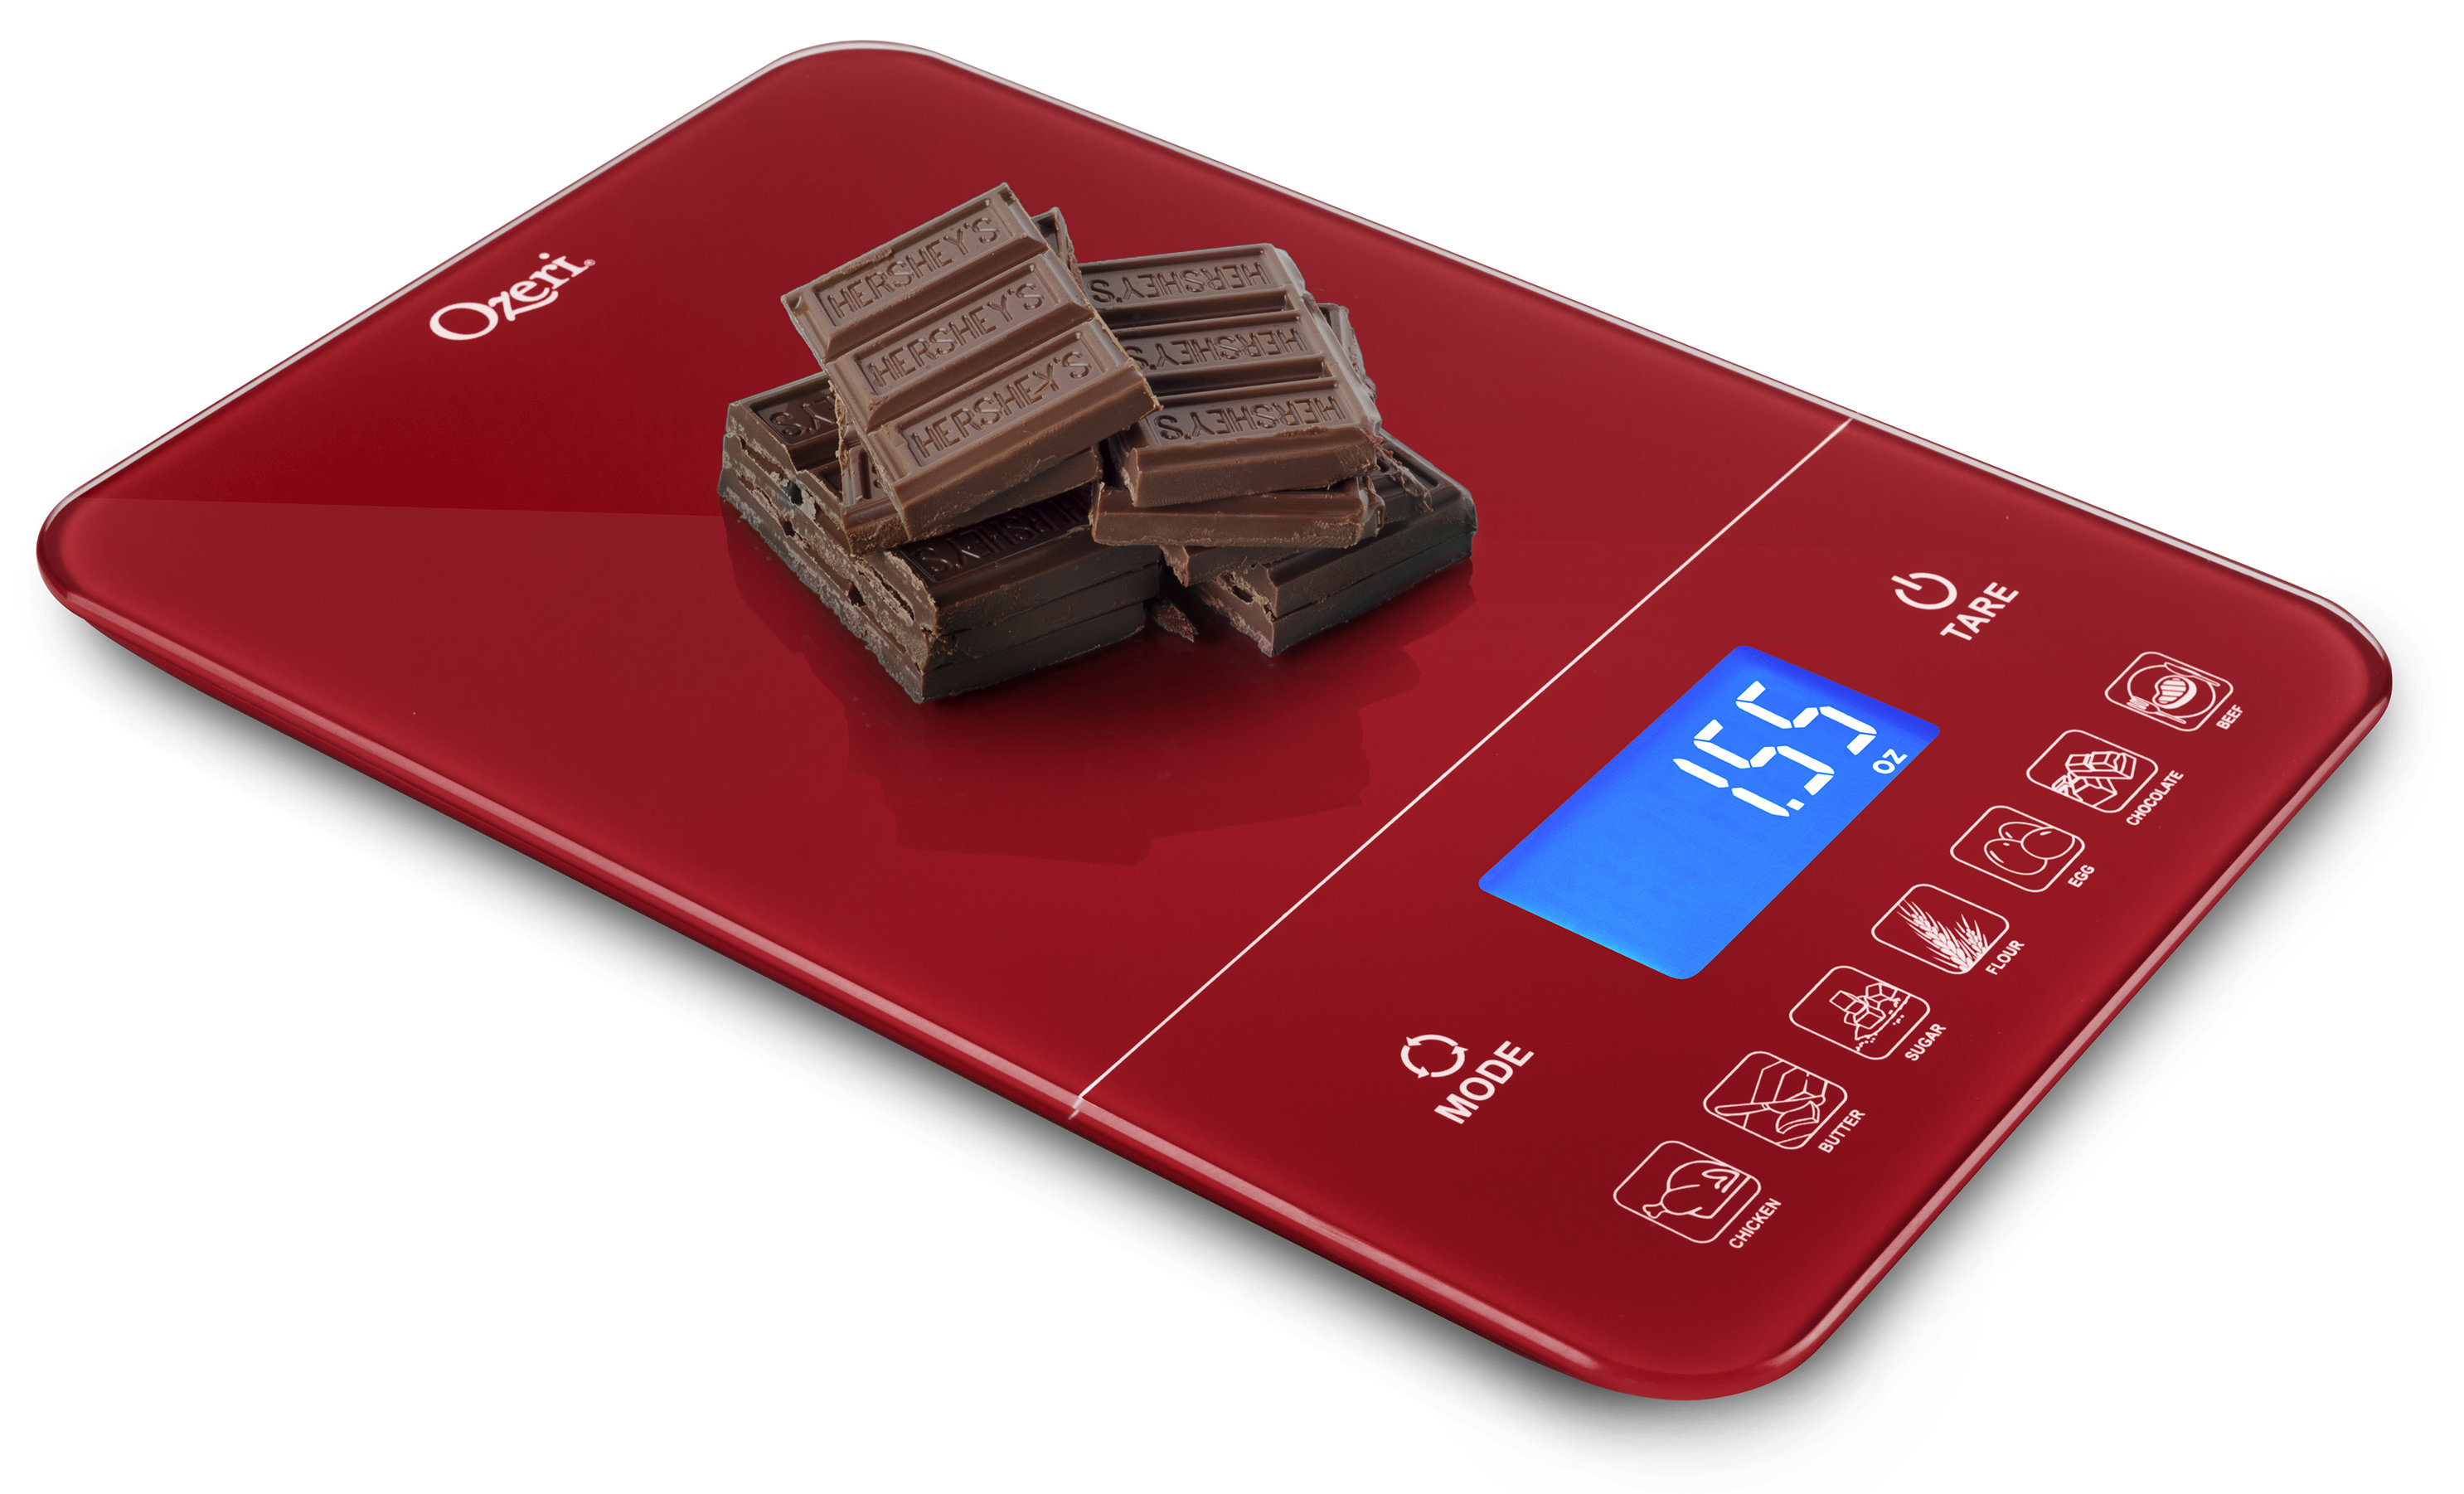 Ozeri Touch III 22 lbs (10 kg) Digital Kitchen Scale with Calorie Counter,  Tempered Glass (Assorted Colors) - Sam's Club